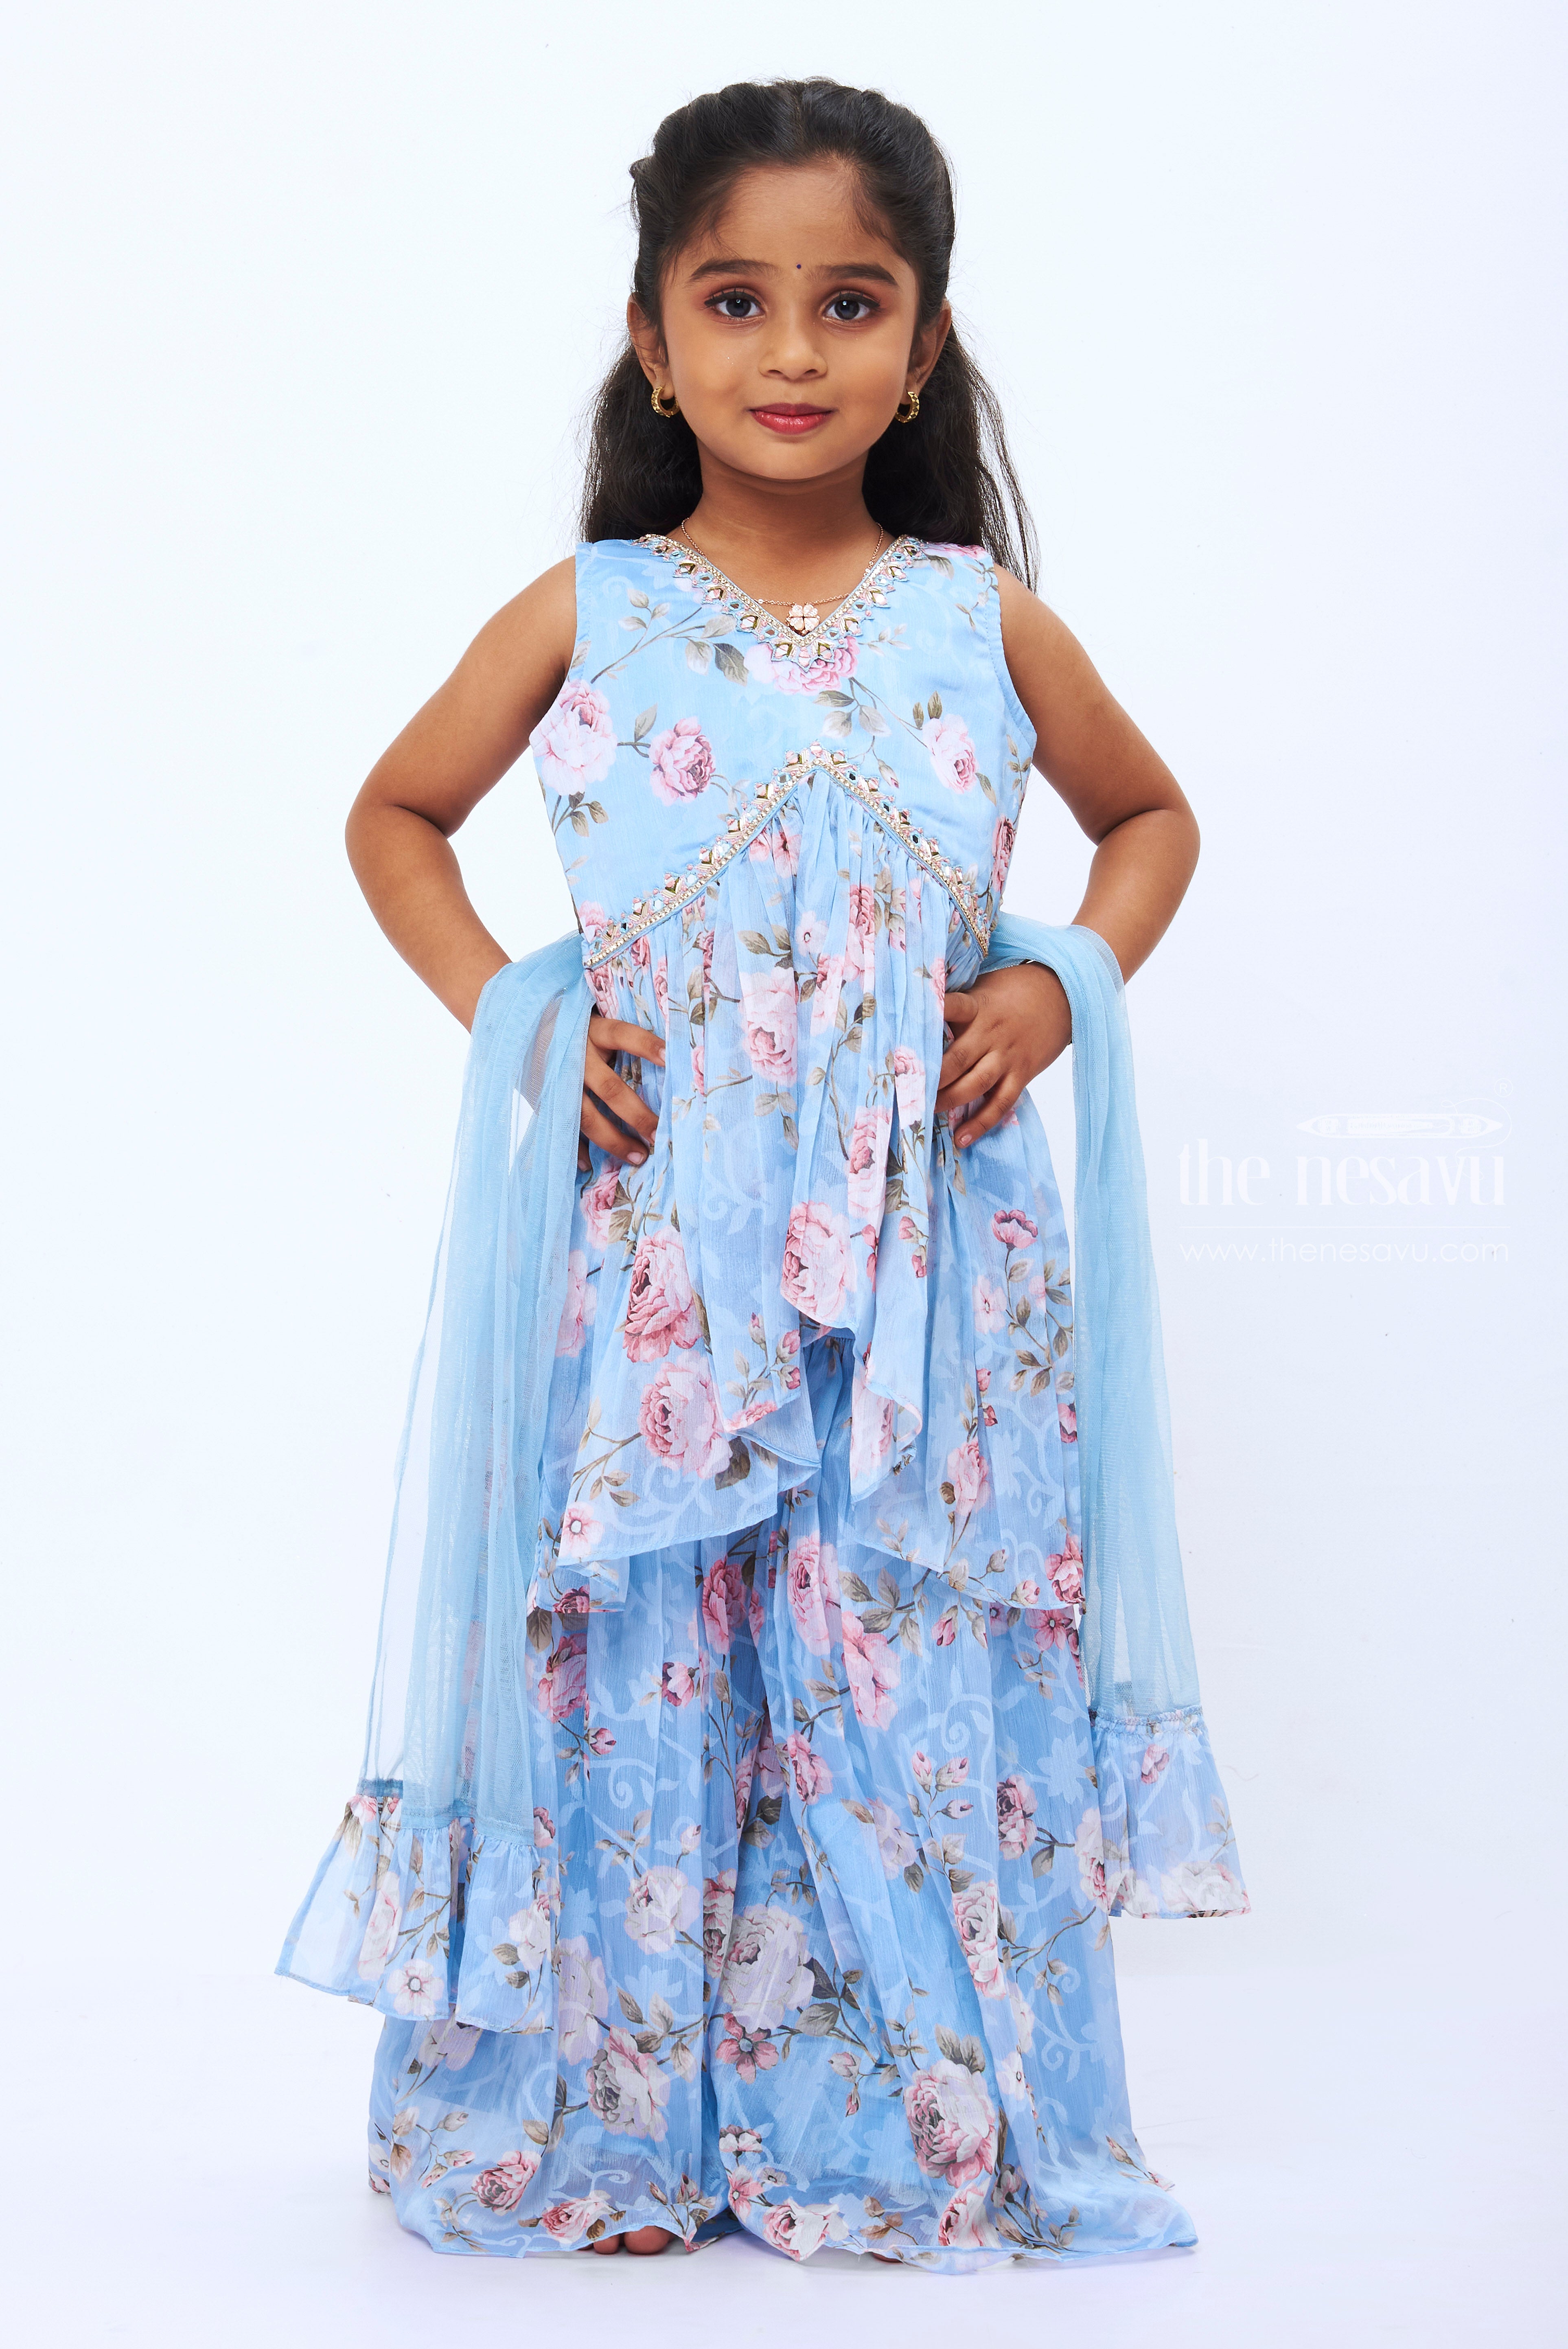 HVM Top & Palazzo Set For Girls - Online Shopping Site in India for Kids  Clothing I Kids Footwear I Baby Clothing I Fashion Accessories I Boys  Clothing I Girls Clothing I